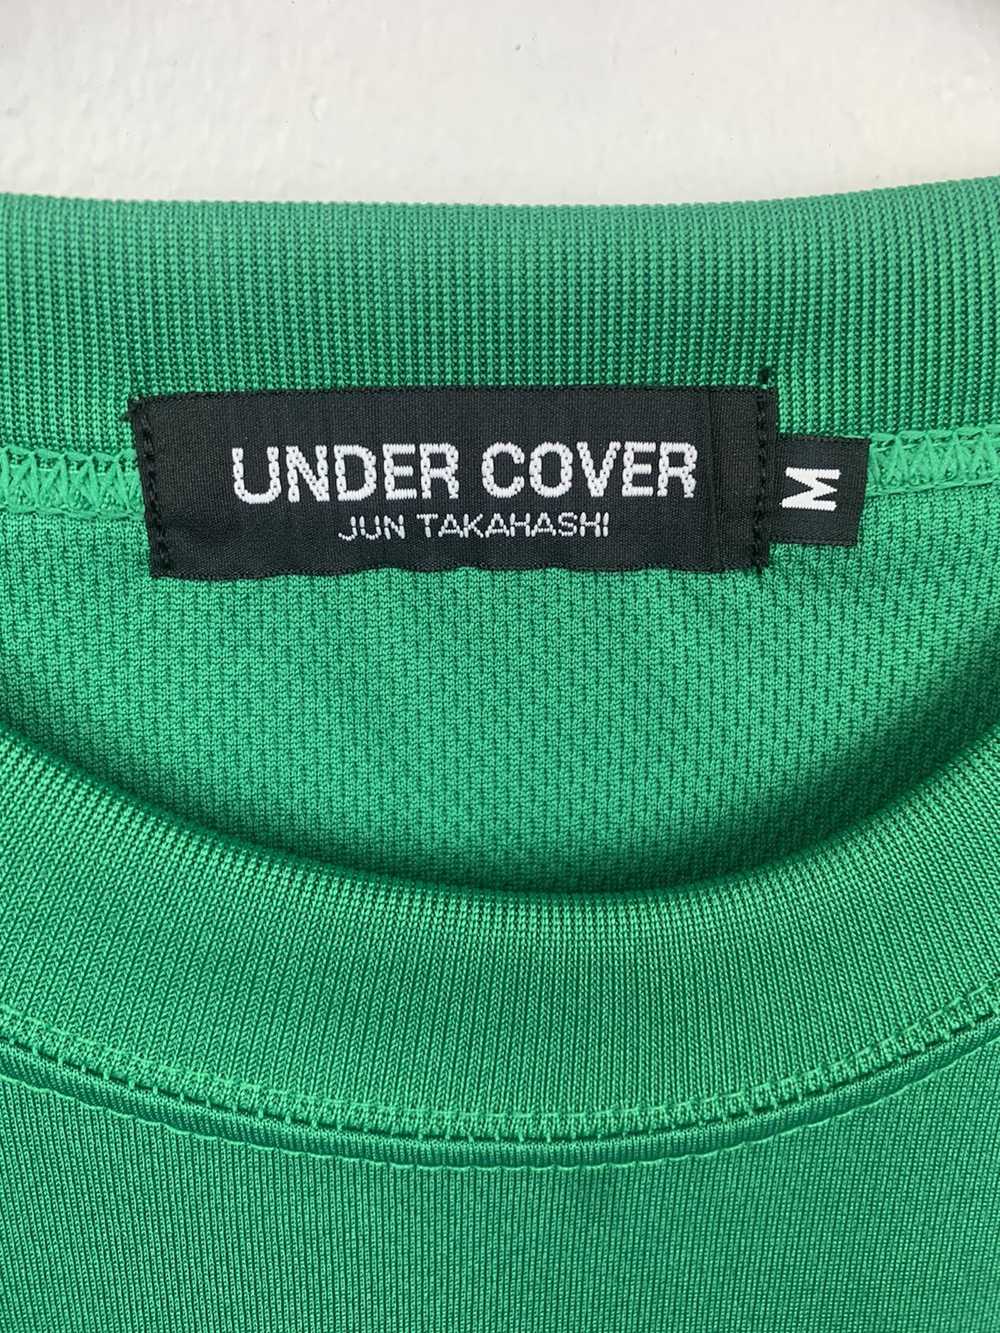 Undercover Undercover tee - image 3